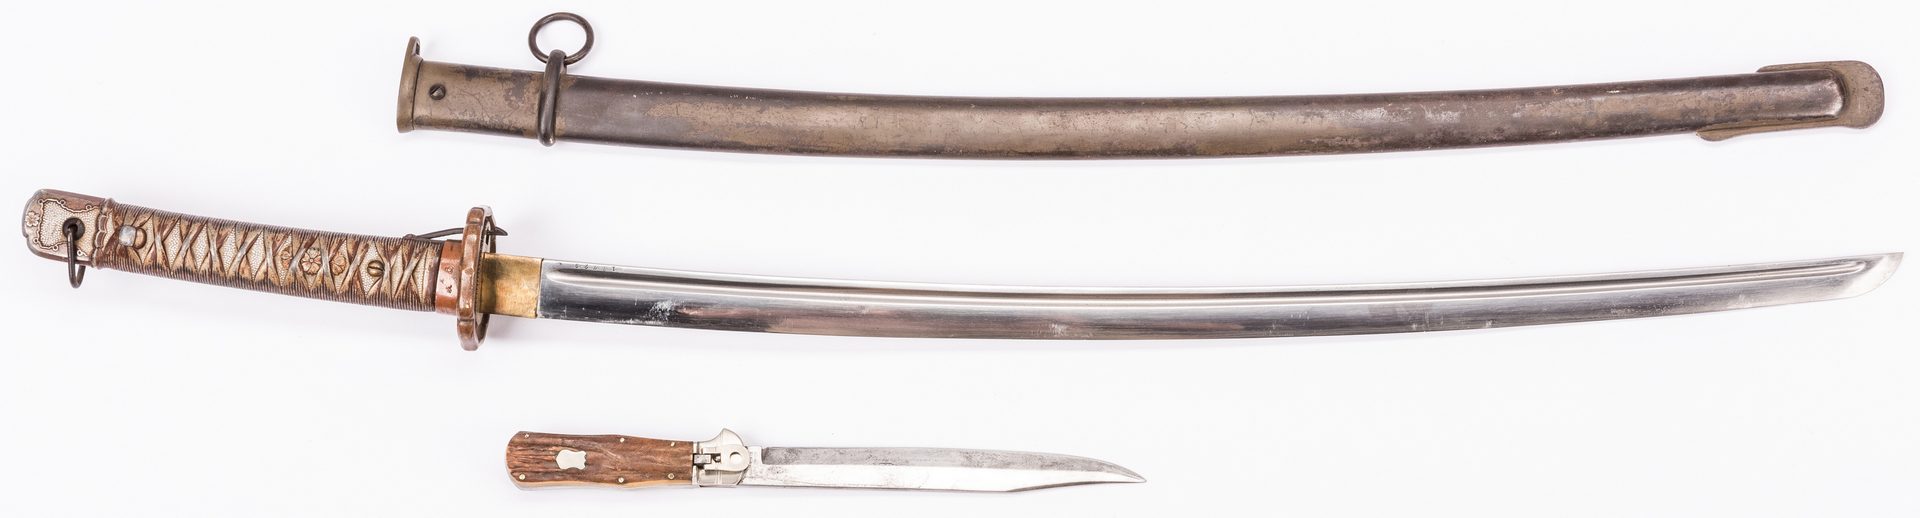 Lot 801: Japanese Type 95 NCO Sword & Welterbach Knife, 2 items